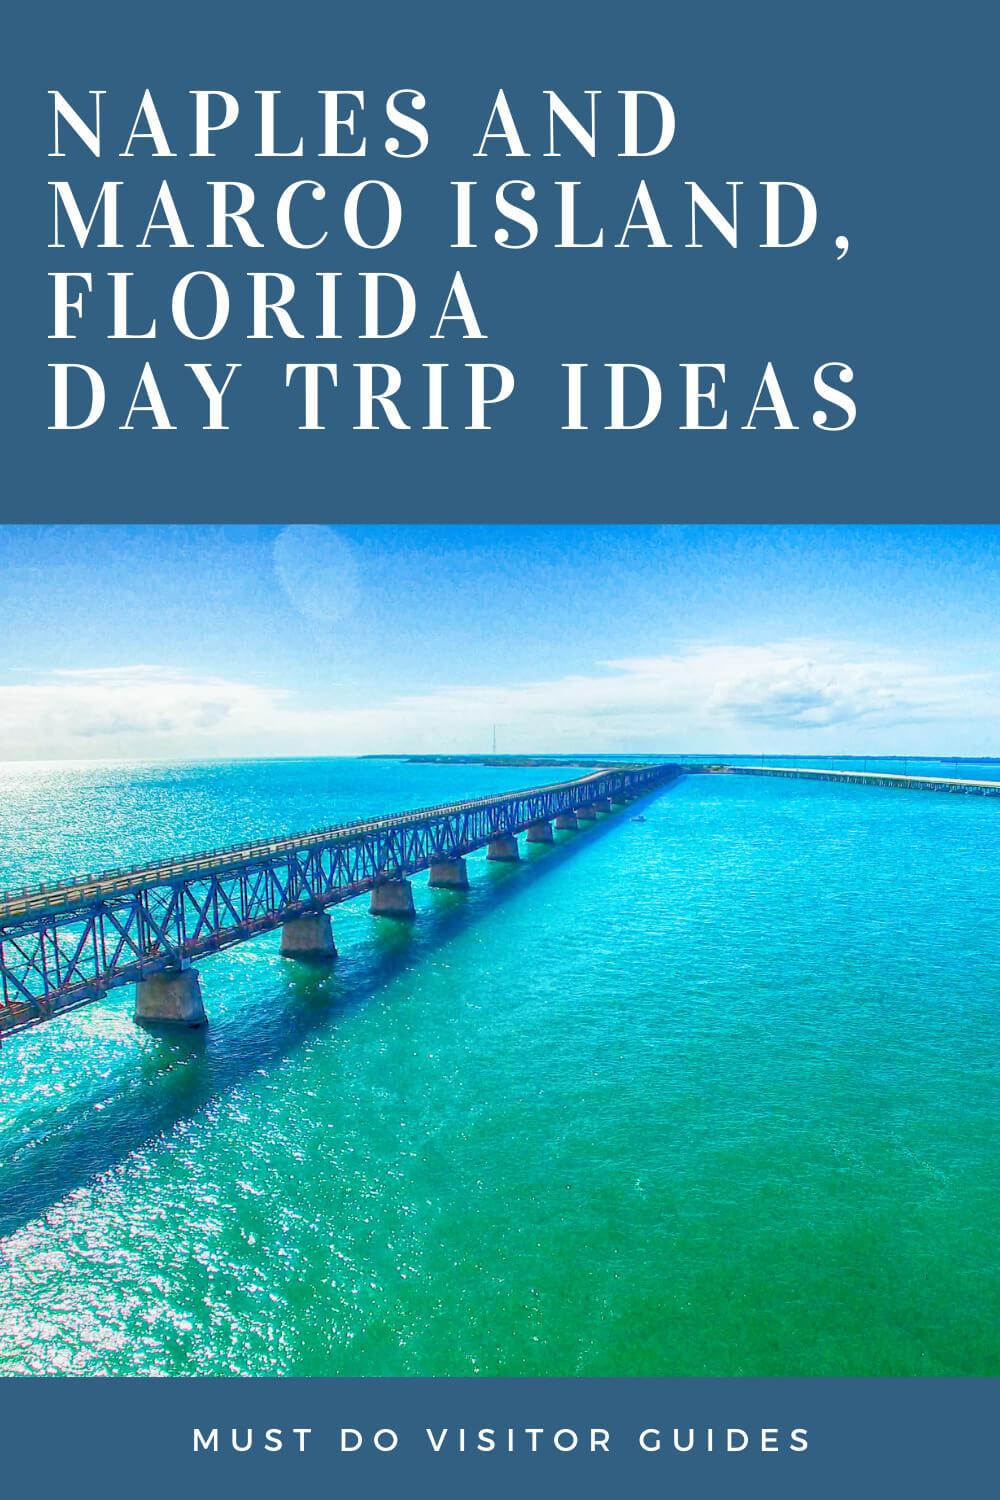 5 easy and family-friendly Naples and Marco Island, FL Day Trip Ideas. Must Do Visitor Guides